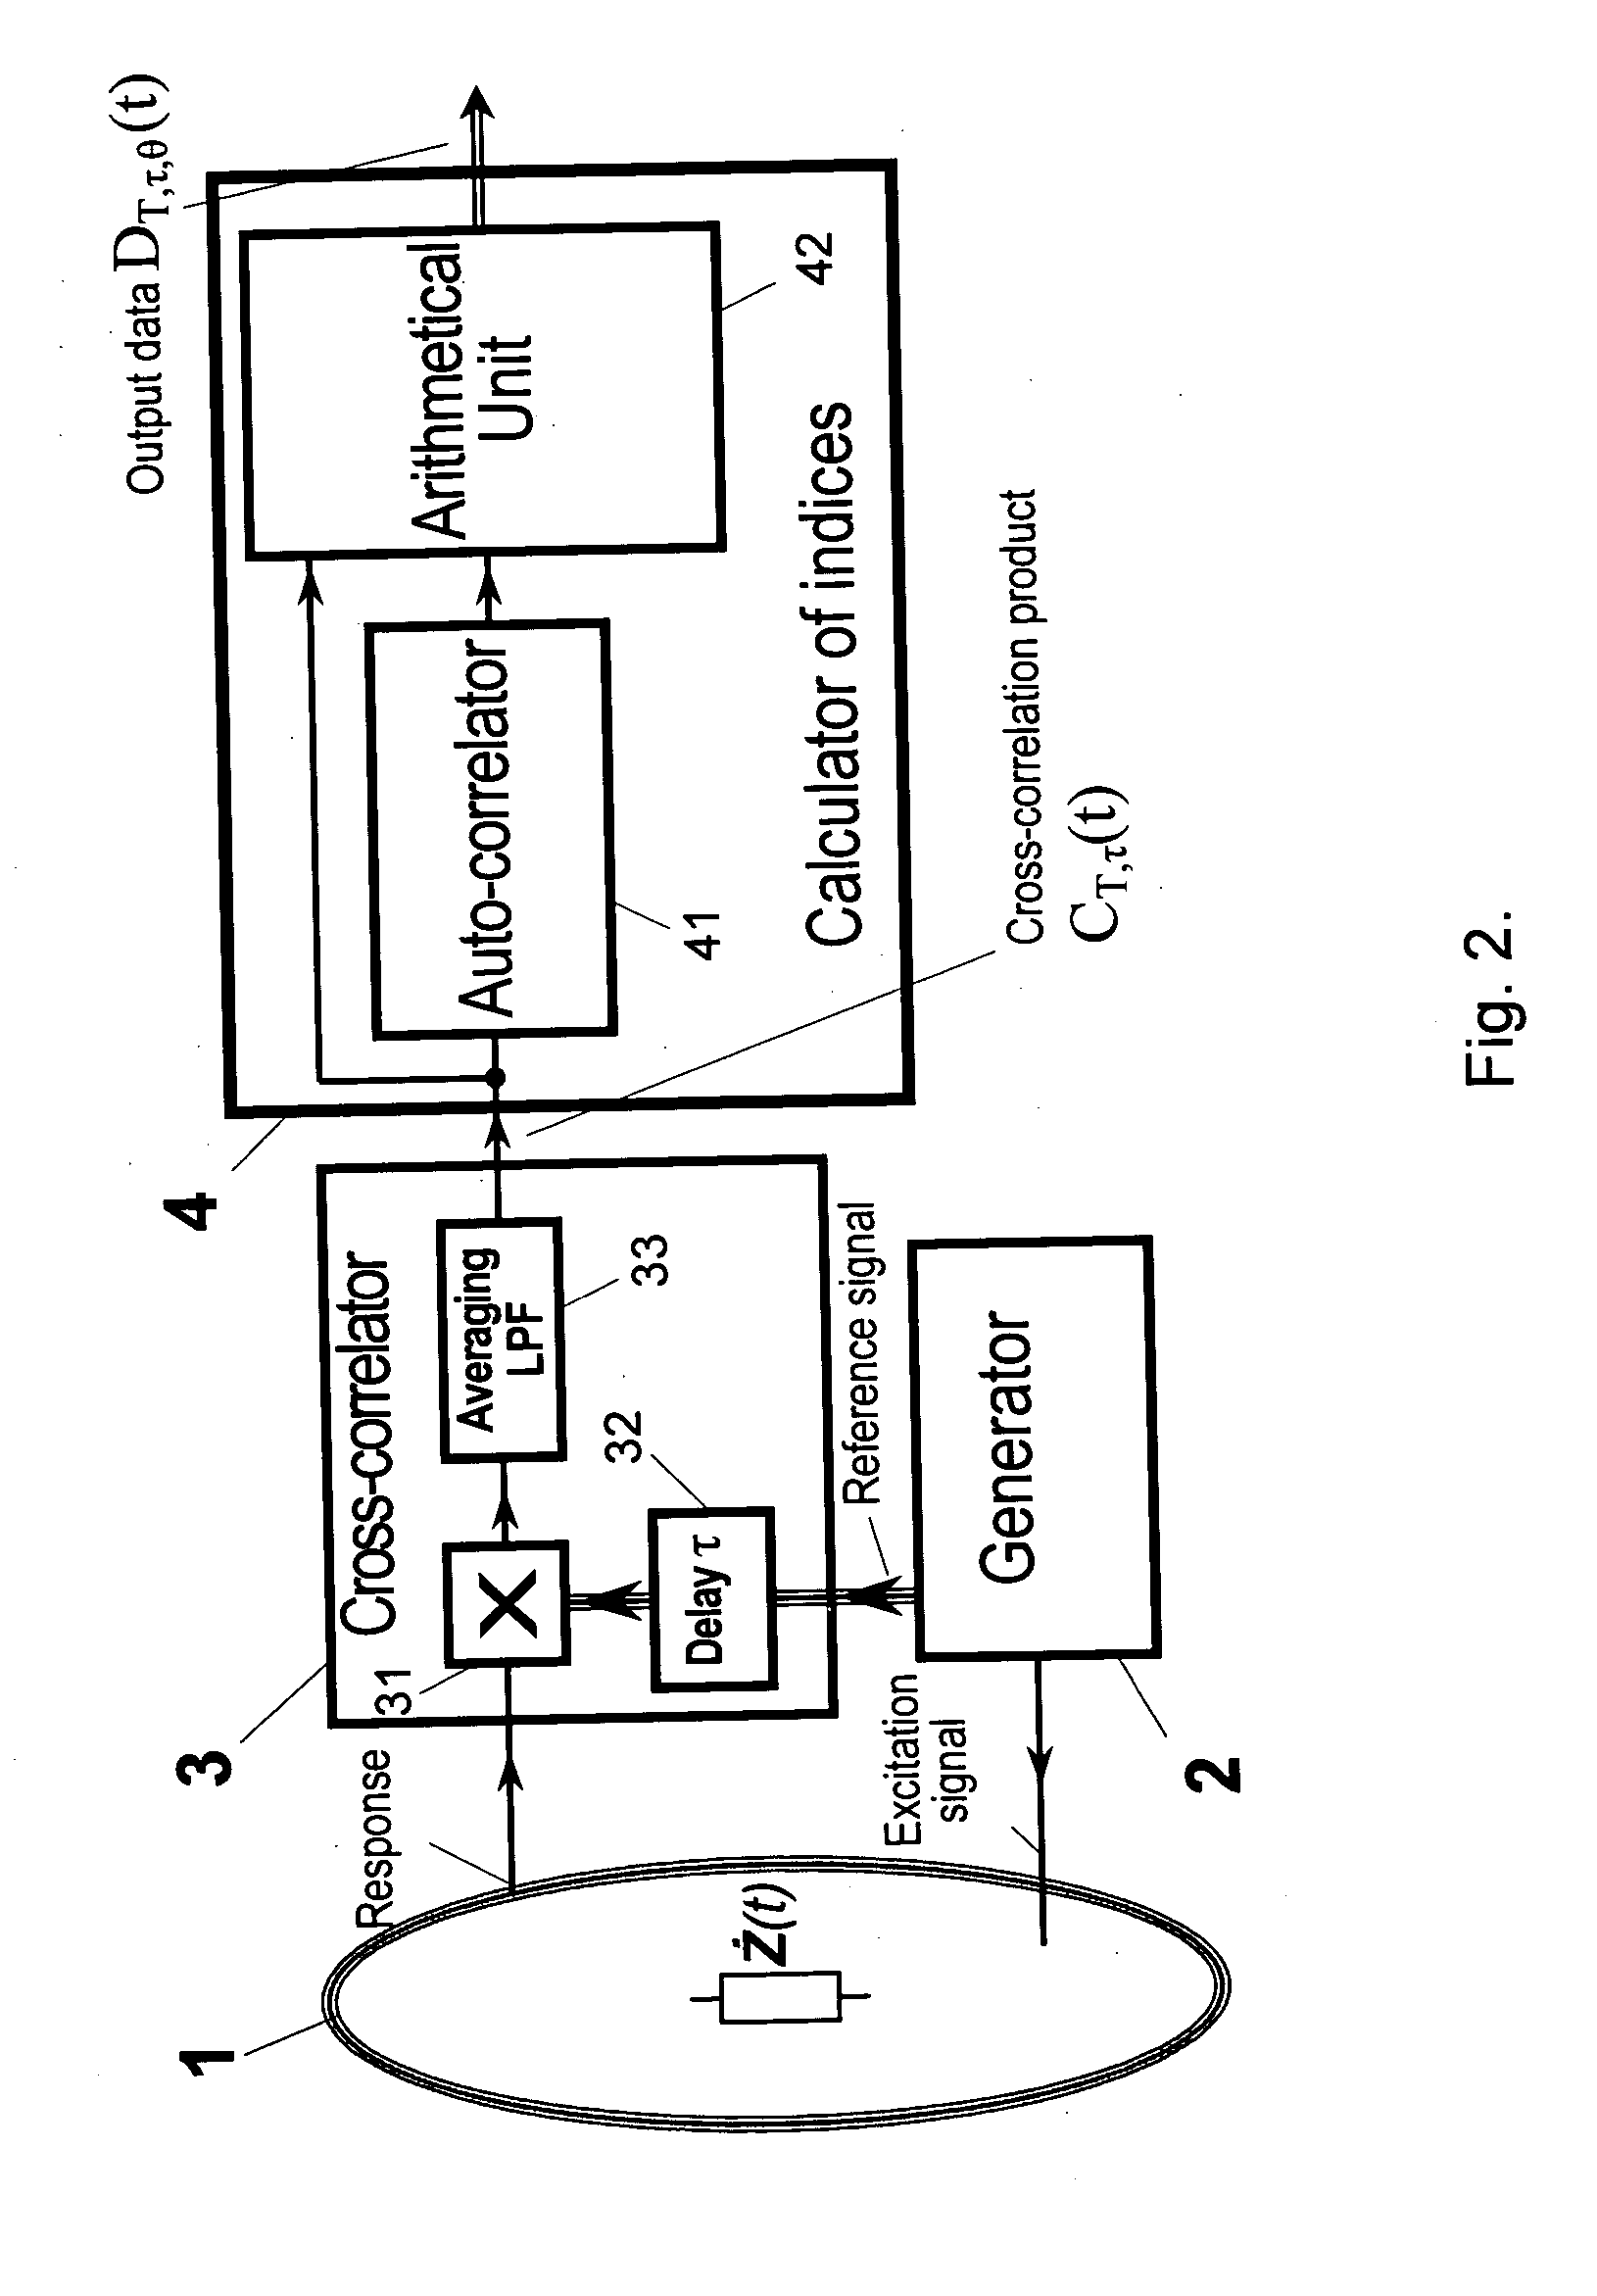 Method and apparatus for determining conditions of a biological tissue